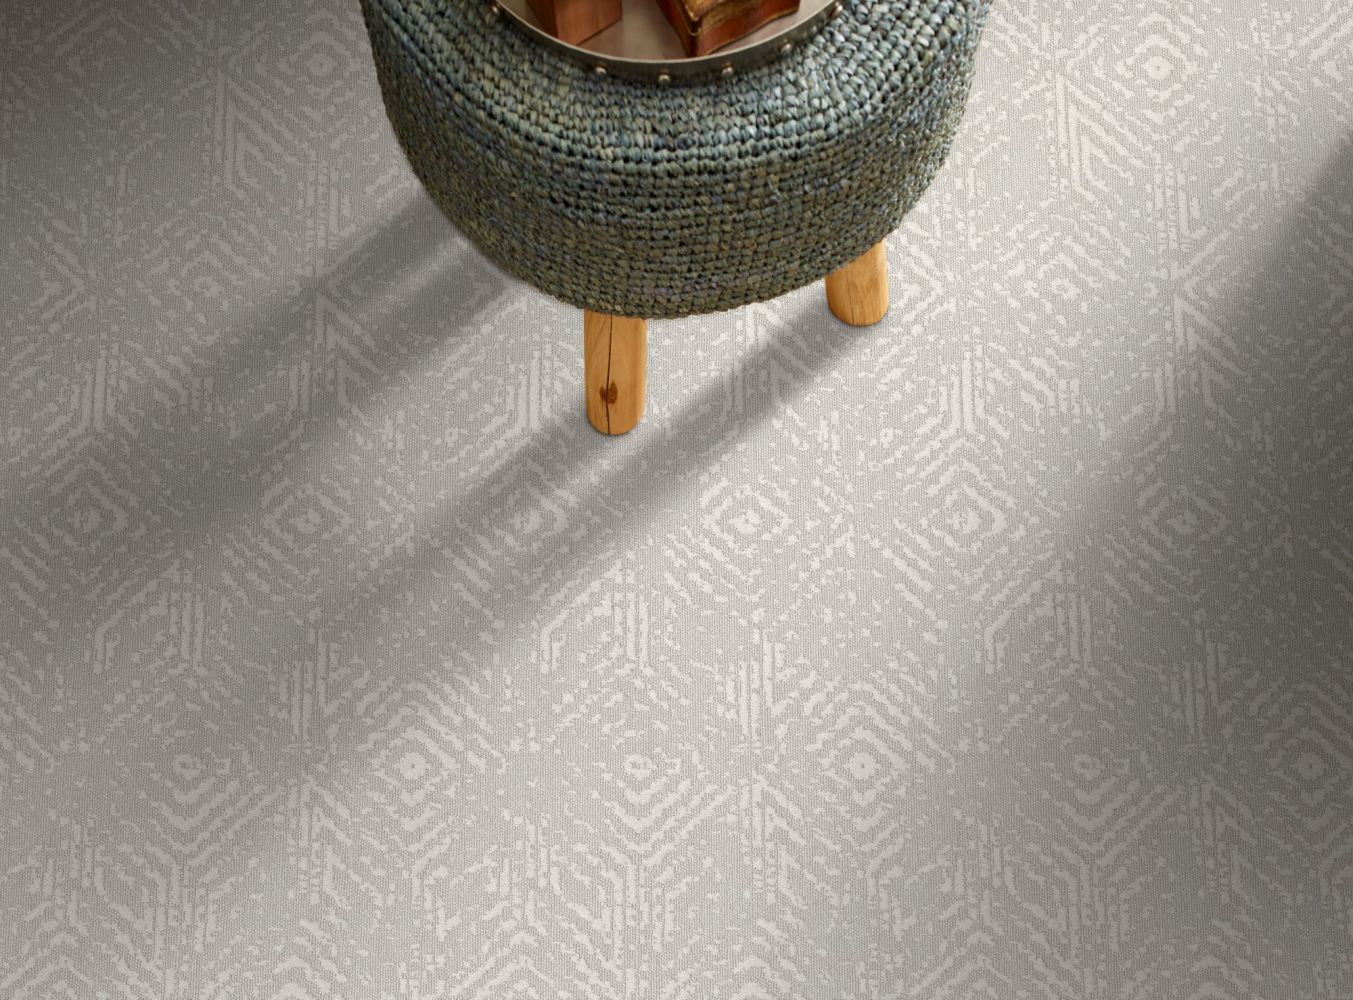 Shaw Floors Caress By Shaw Vintage Revival Net Baltic Stone 00128_5E381